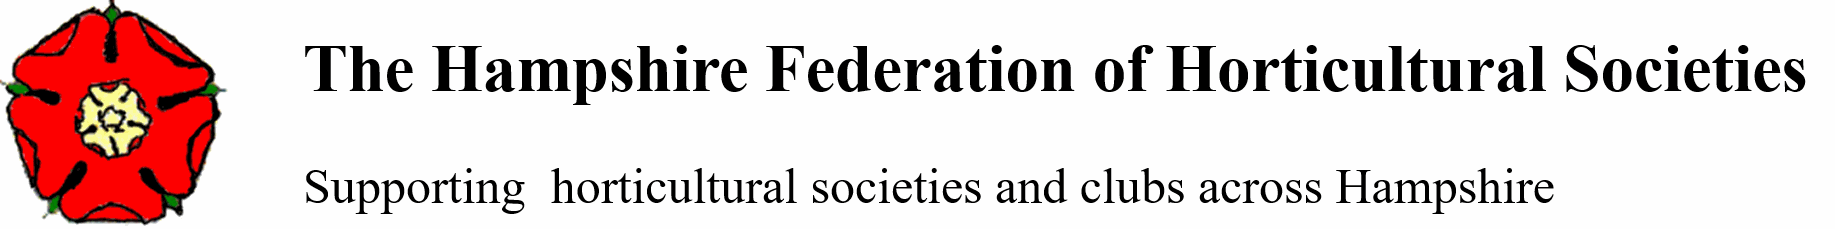 The Hampshire Federation of Horticultural Societies